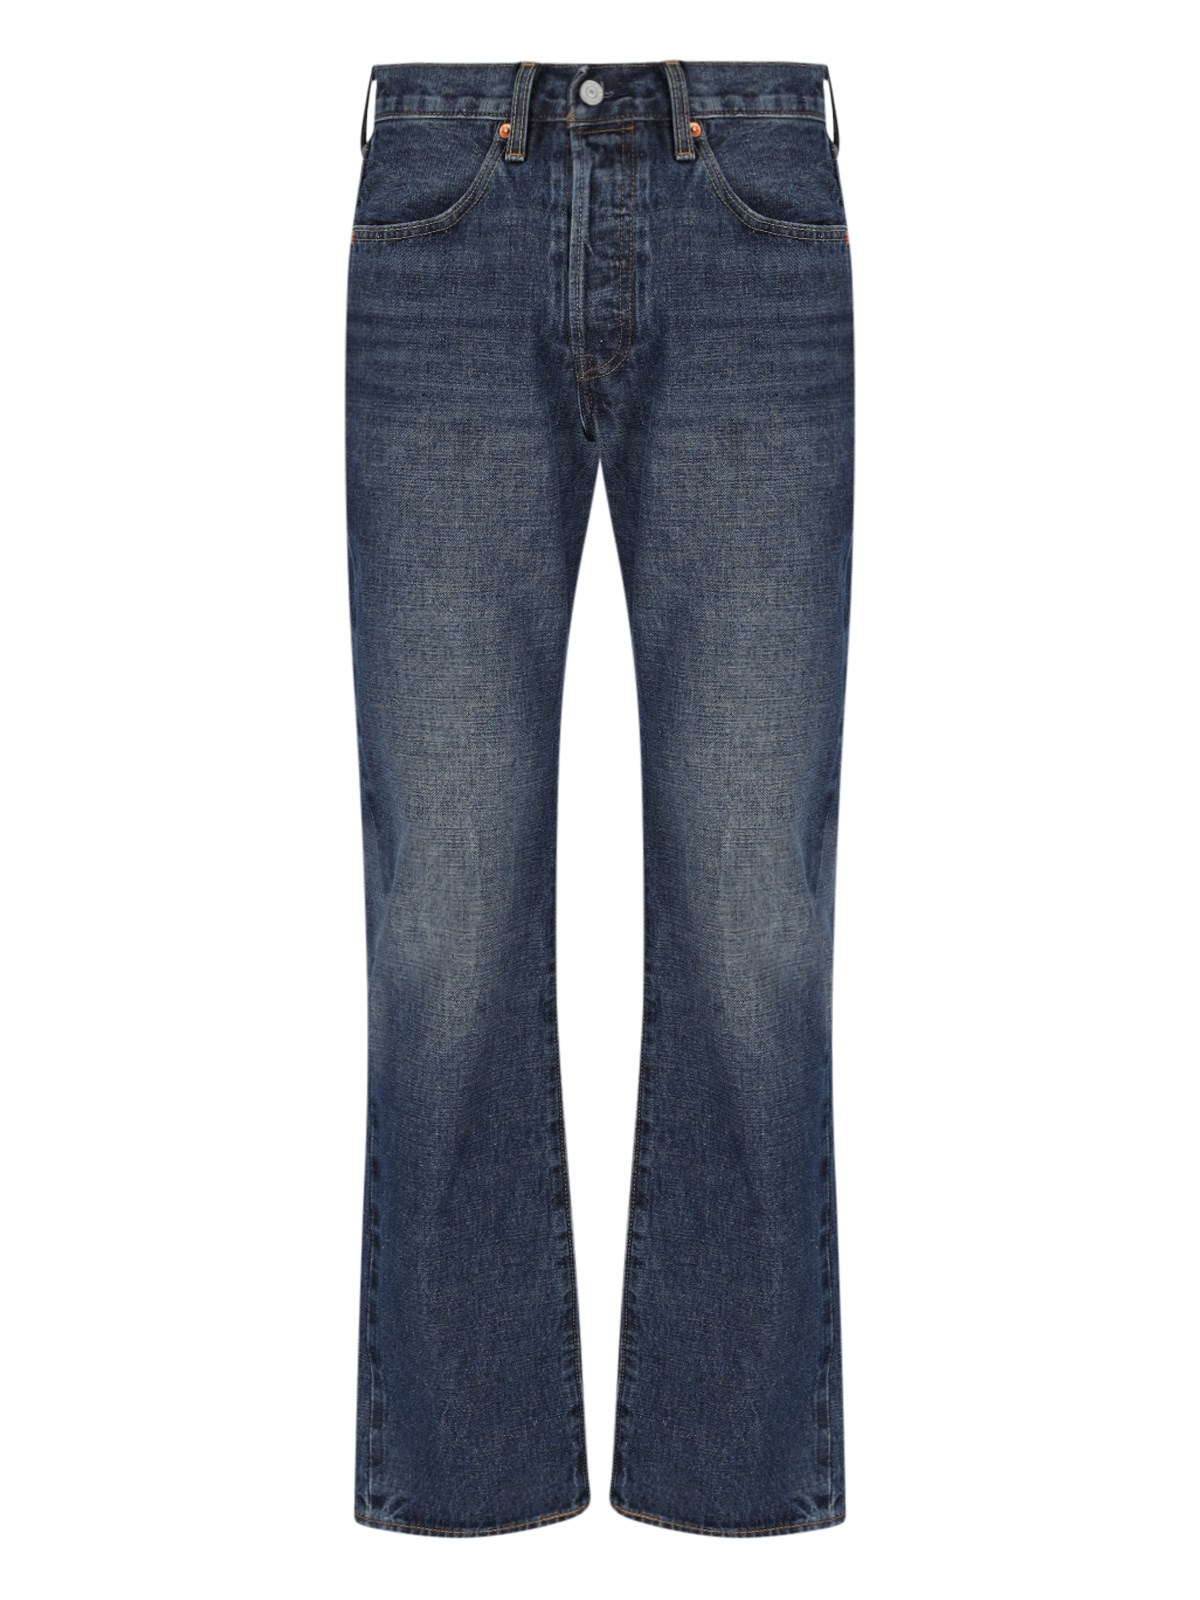 Levi's Strauss "501" Straight Jeans In Blue